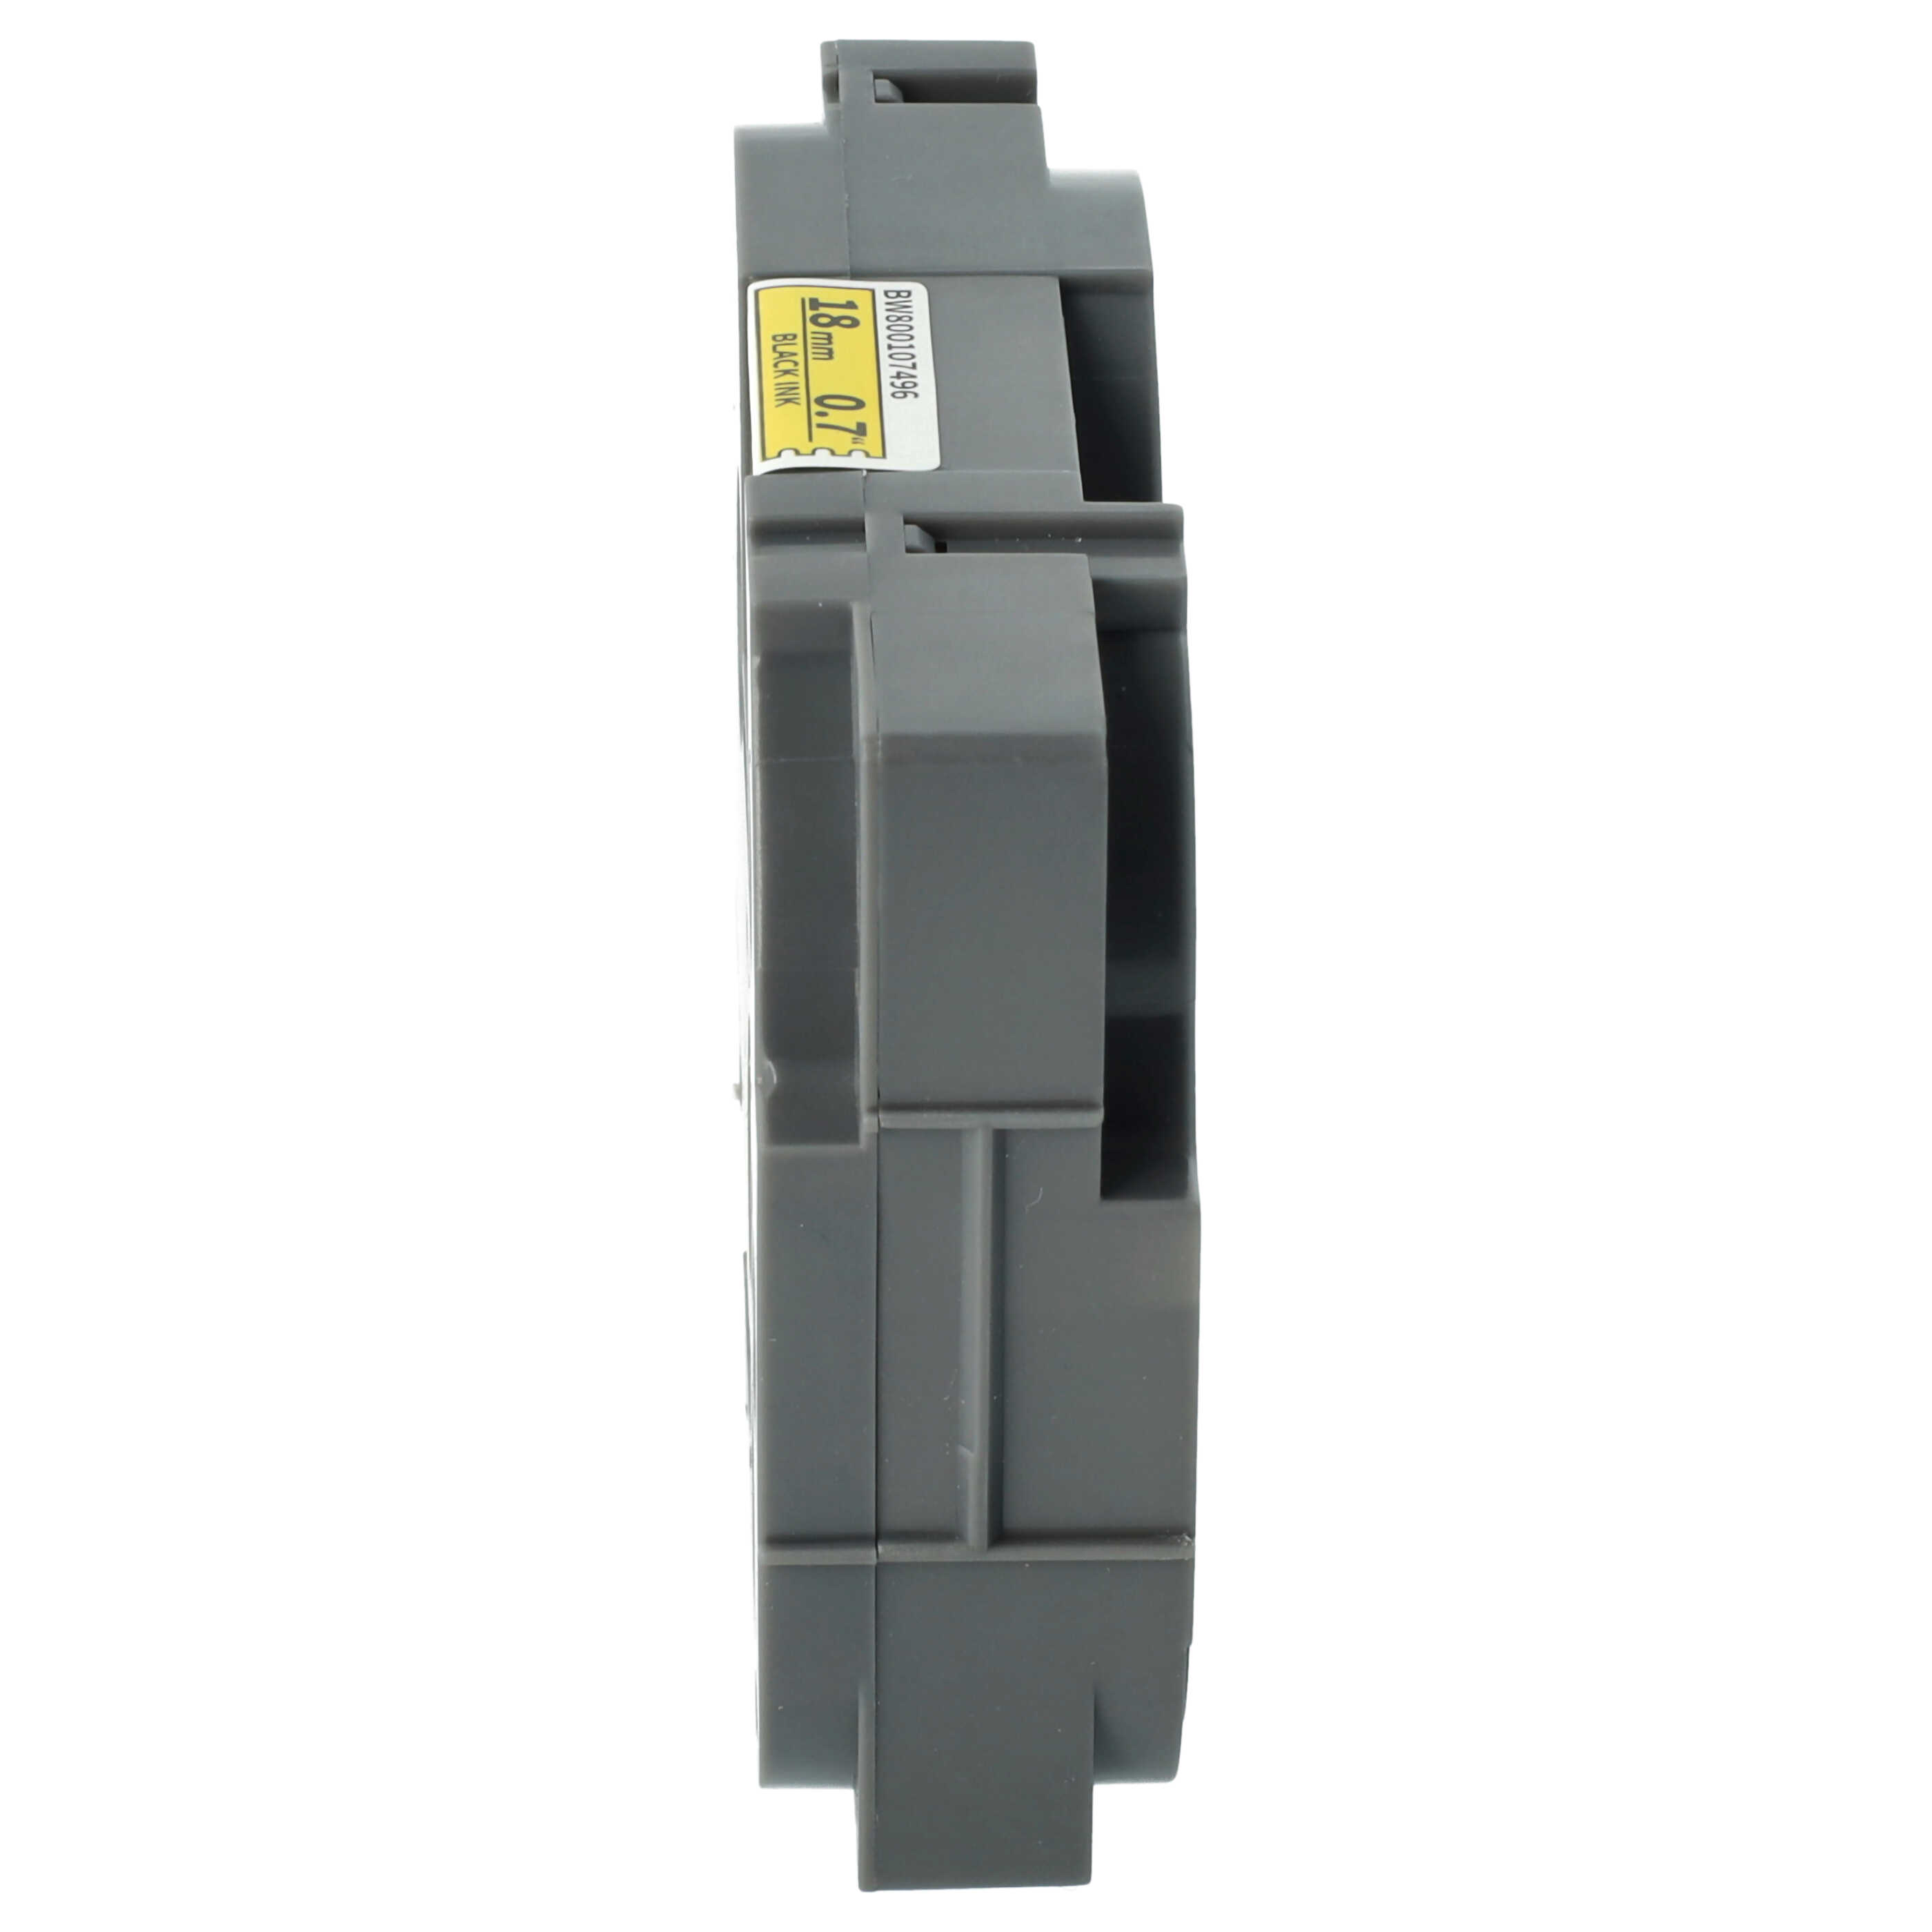 Label Tape as Replacement for Brother TZ-FX641, TZE-FX641 - 18 mm Black to Yellow, Flexible